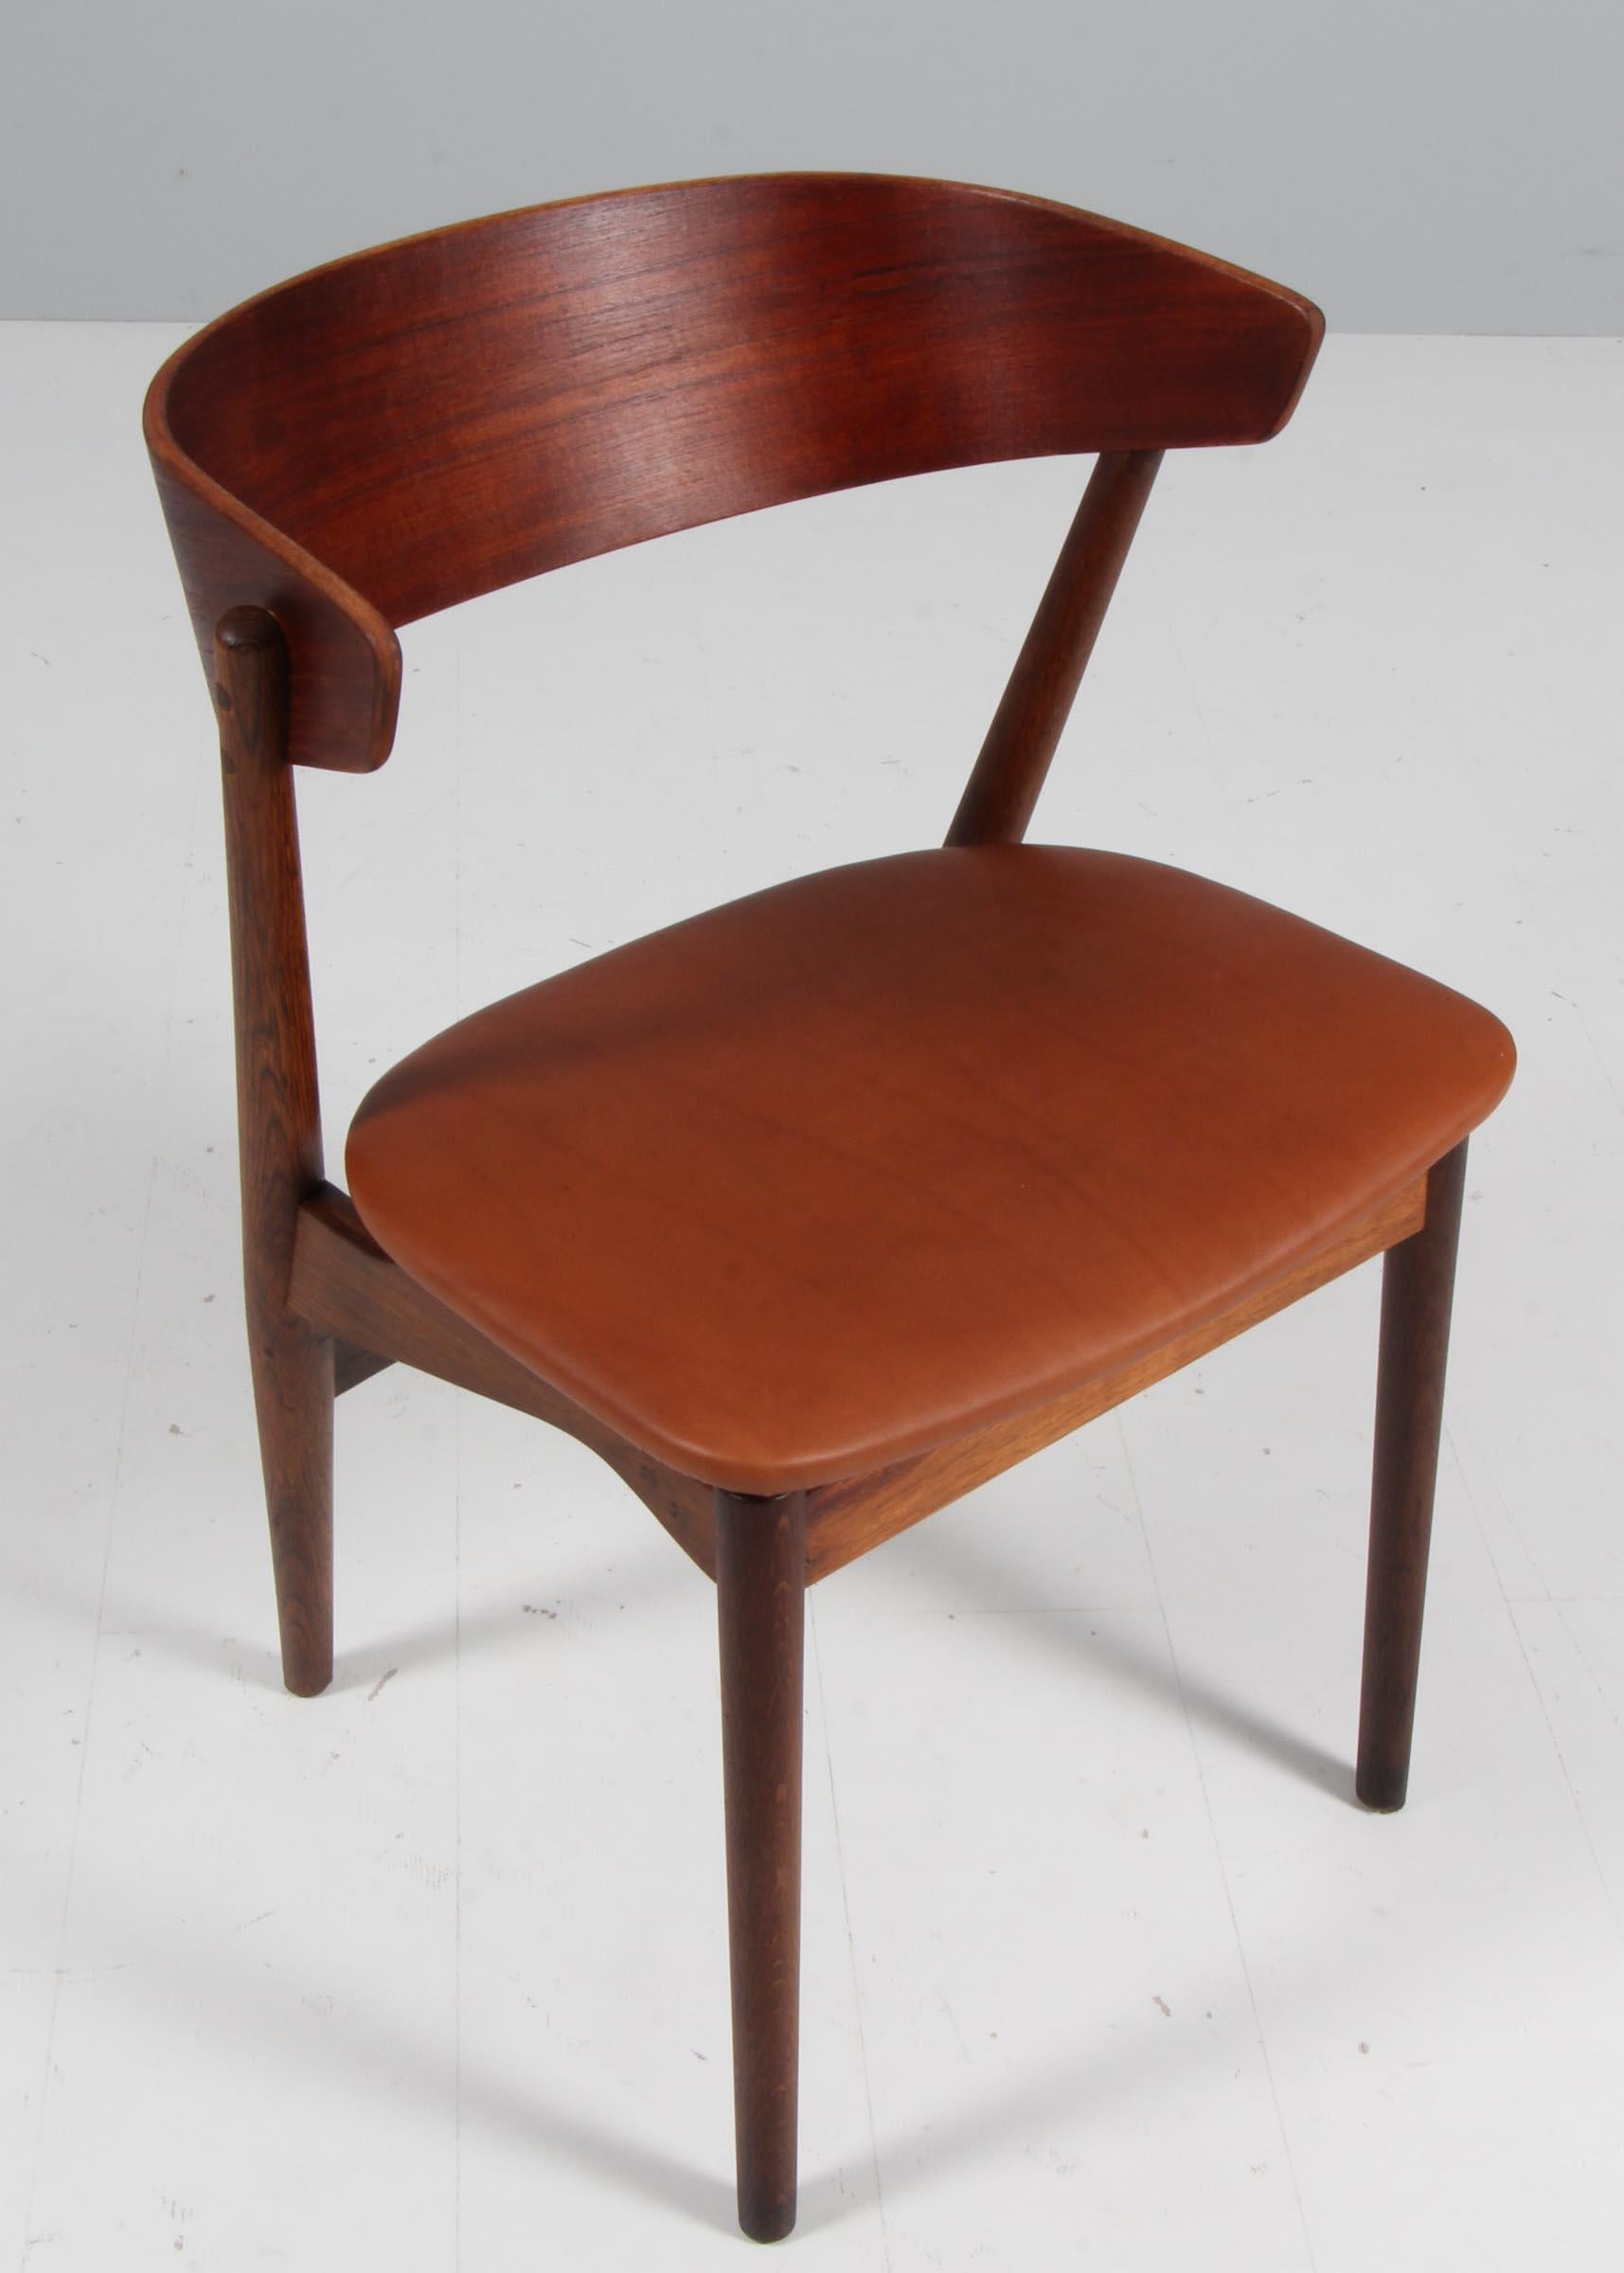 Helge Sibast armchair with back of teakand frame of oak.

New upholstered with tan vintage aniline leather.

Model 7.